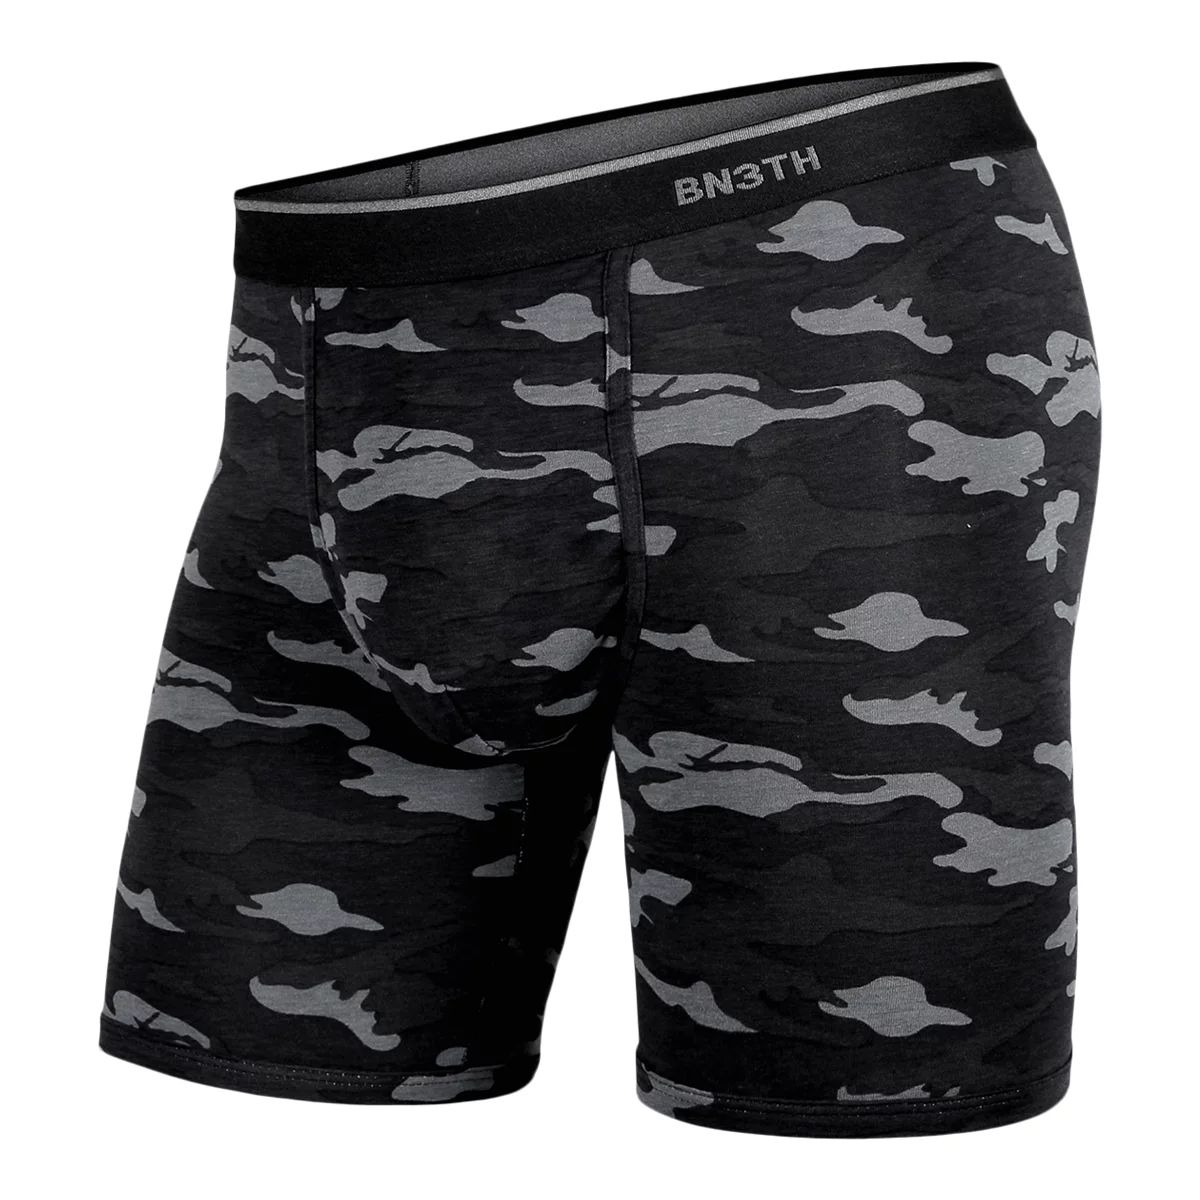 https://media-www.atmosphere.ca/product/div-03-softgoods/dpt-79-clothing-accessories/sdpt-01-mens/333363424/bn3th-breathe-classic-boxer-b-covert-camo-s--3a5f045f-5fae-4cf2-b95a-ed6145393acf-jpgrendition.jpg